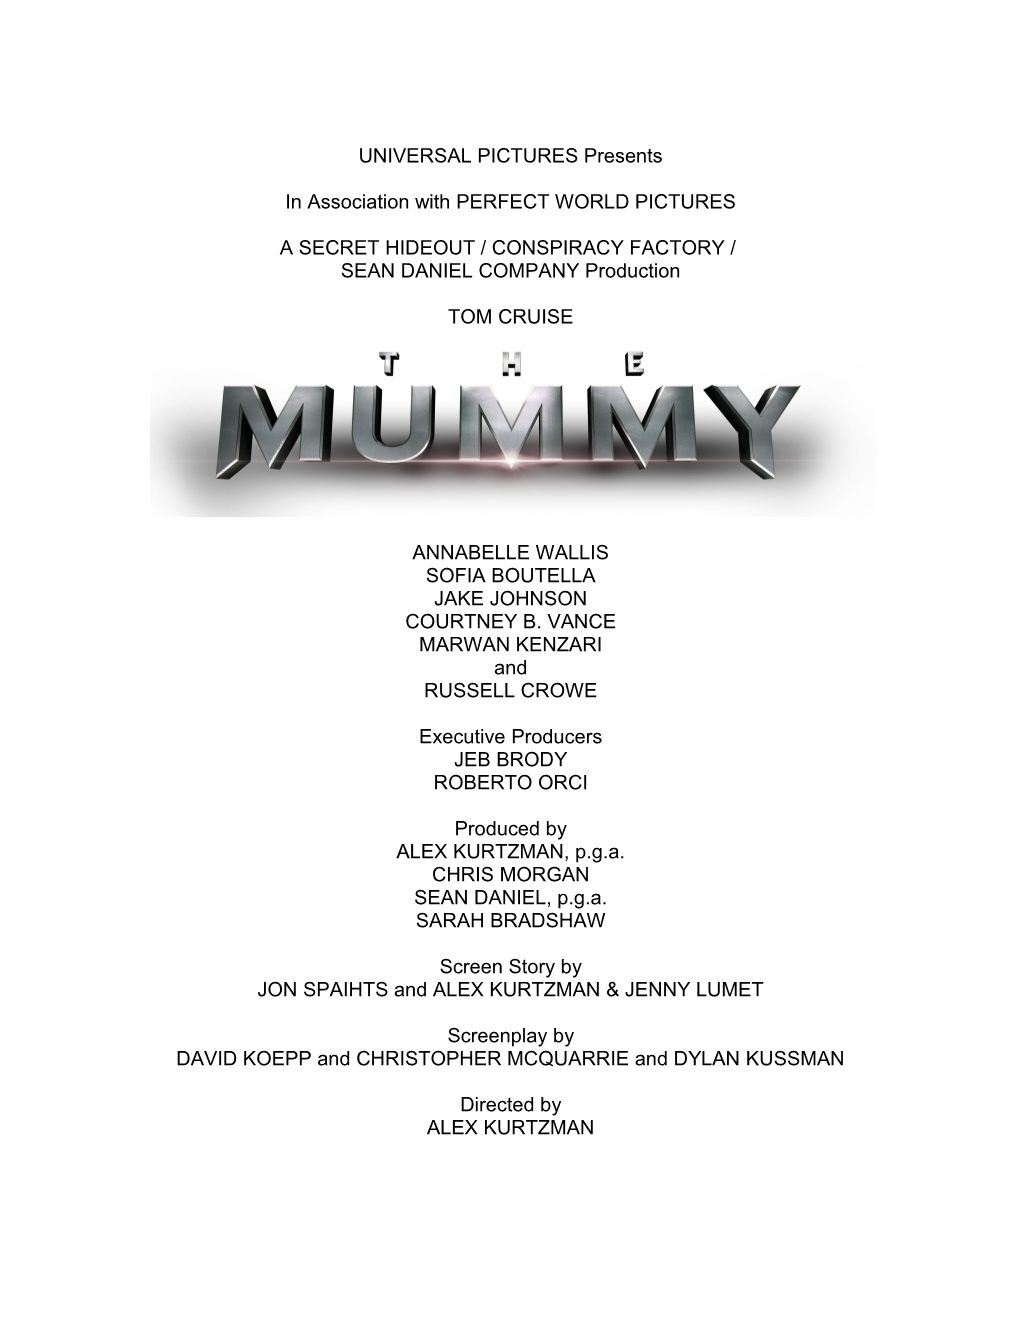 The Mummy Production Information 2